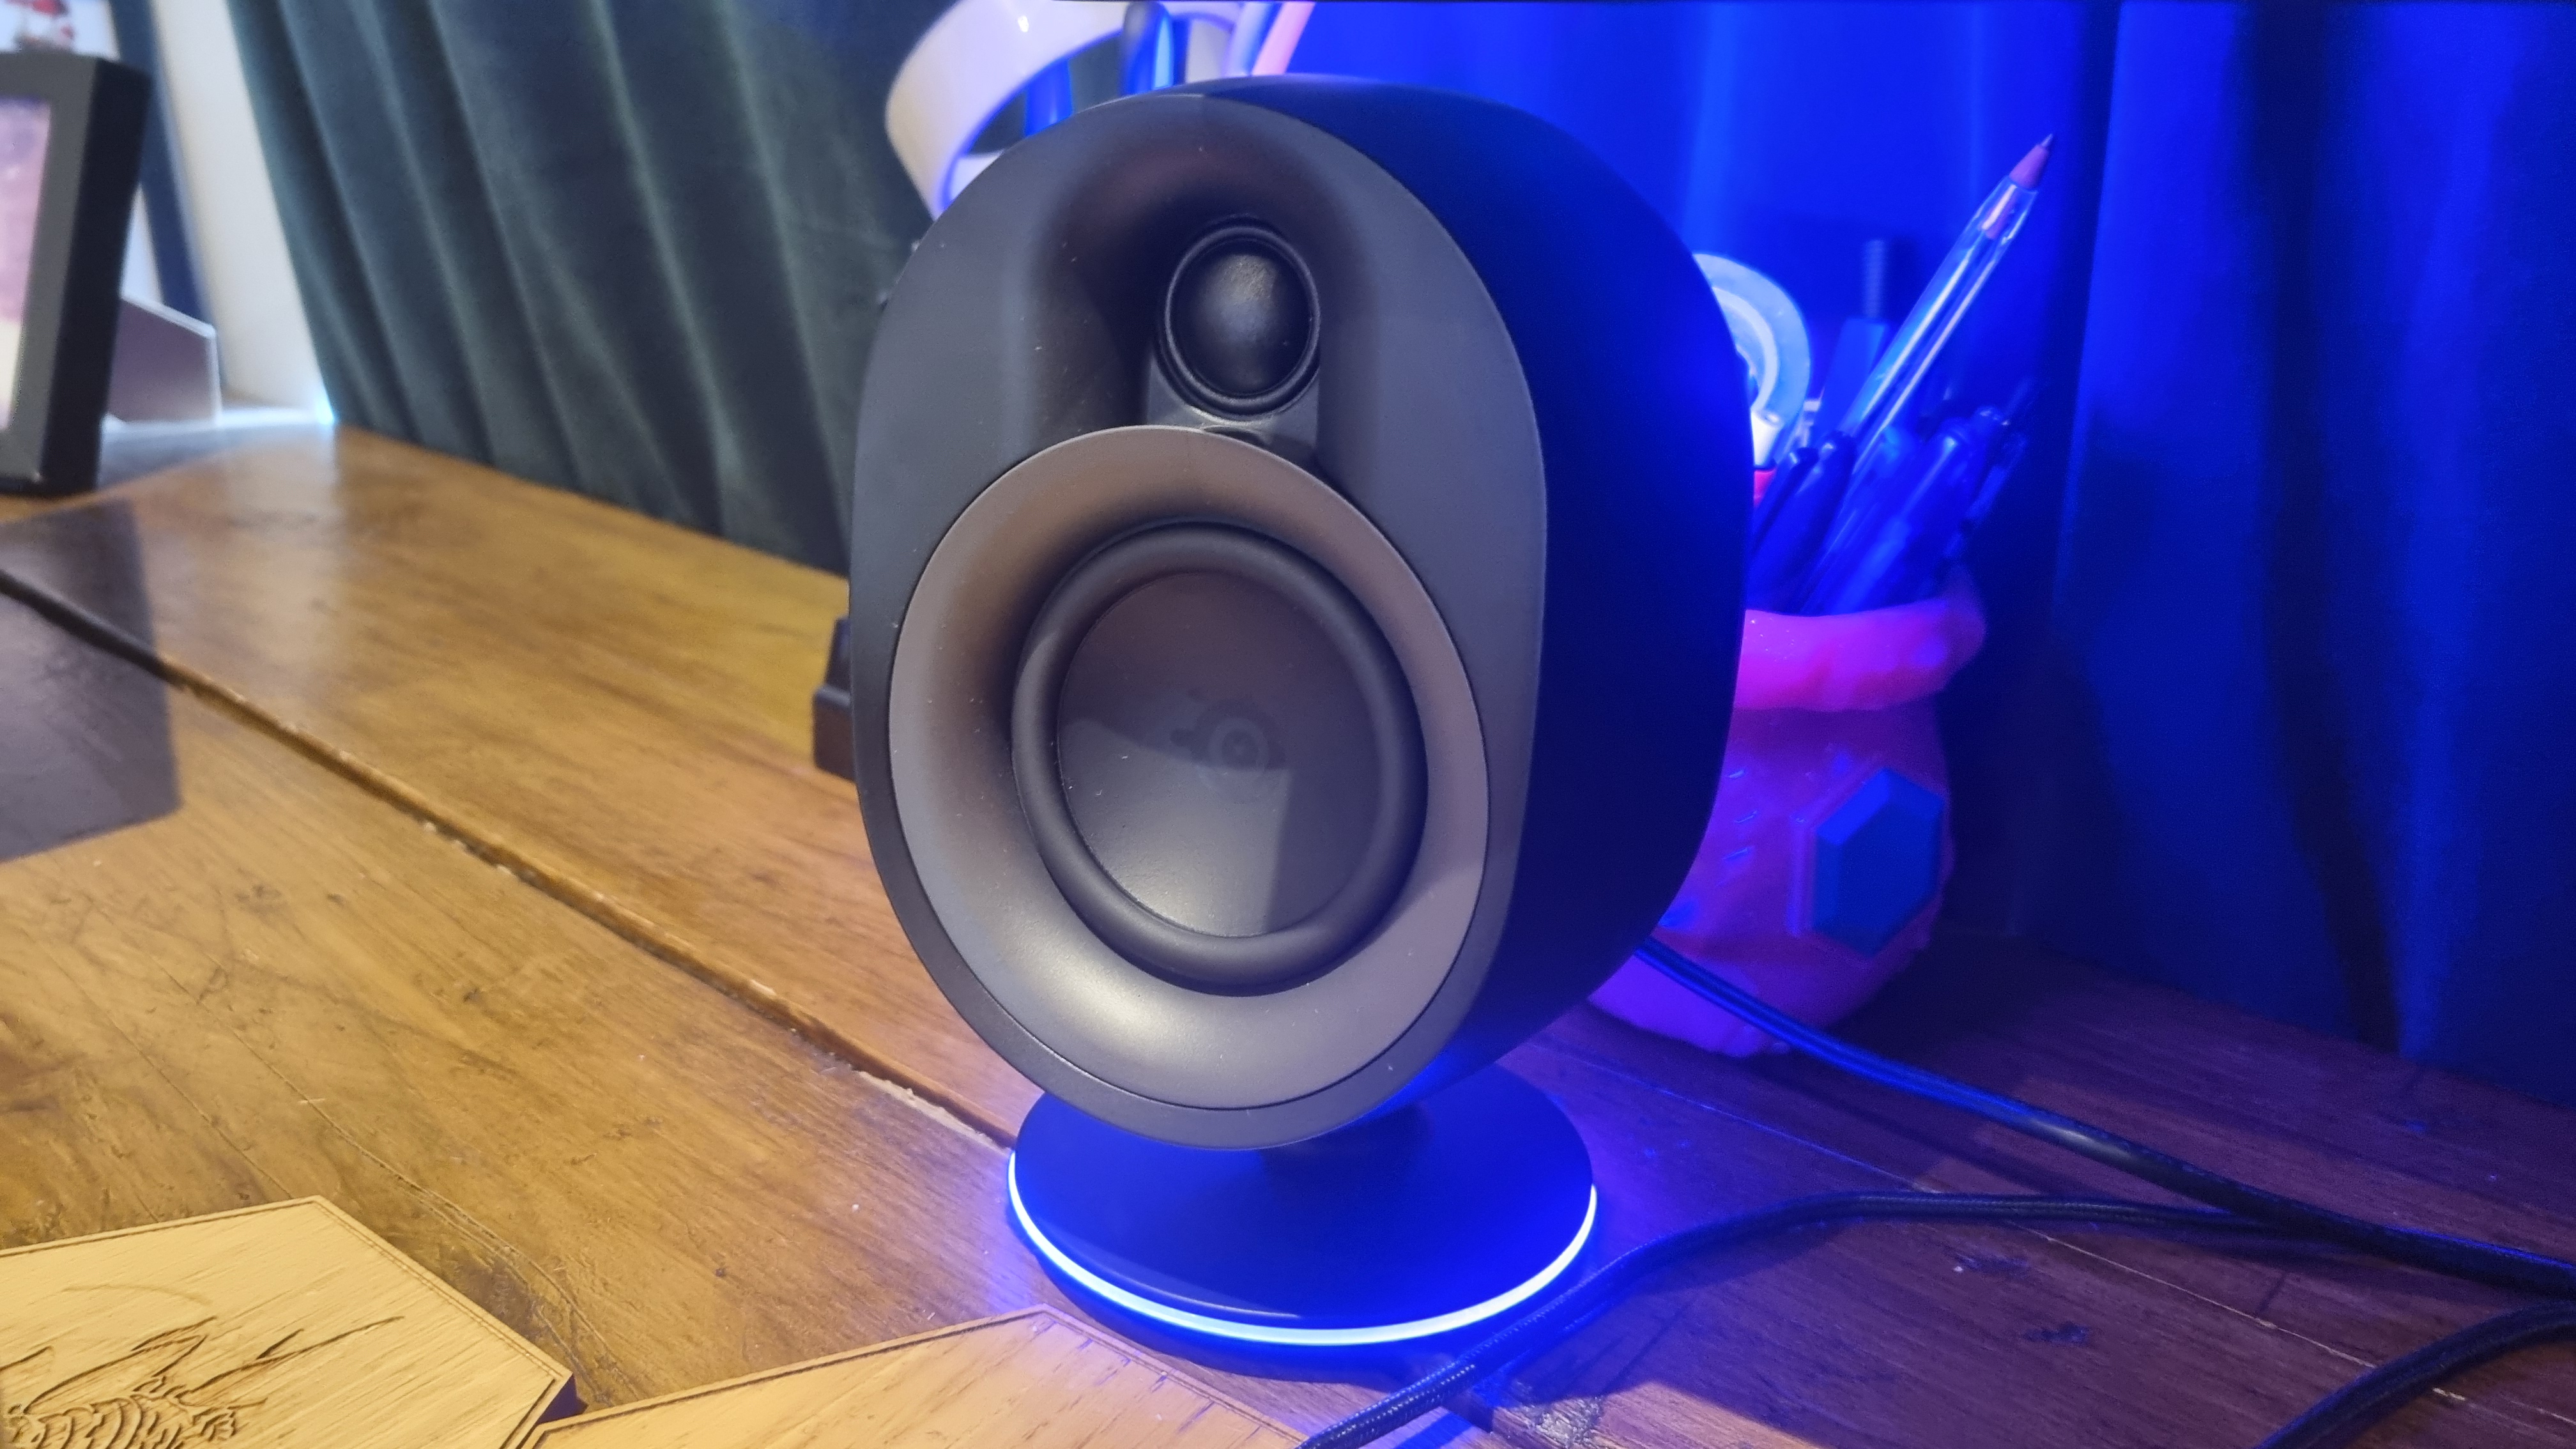 The left front speaker of the SteelSeries Arena 9, lit up in blue